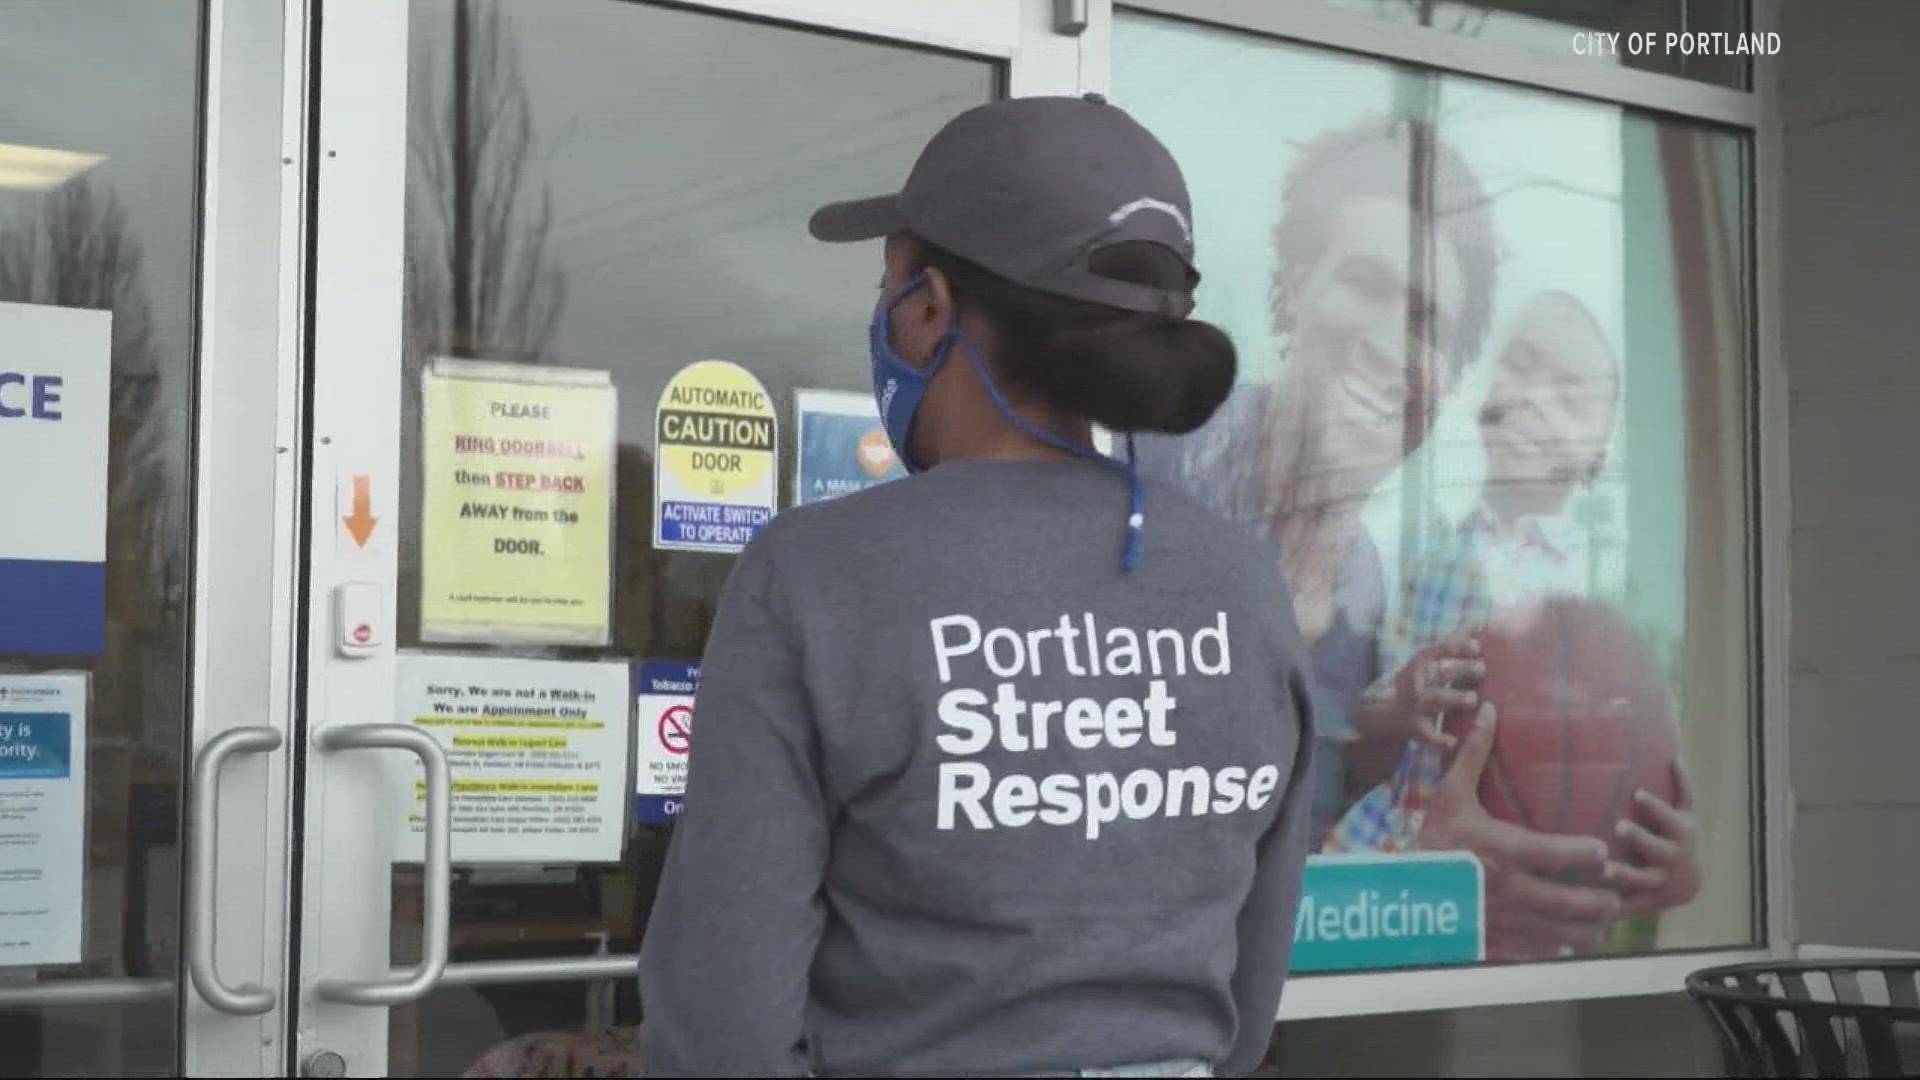 Portland Street Response is expanding their coverage area out of only the Lents neighborhood and adding expanded hours. KGW's Katherine Cook reports.